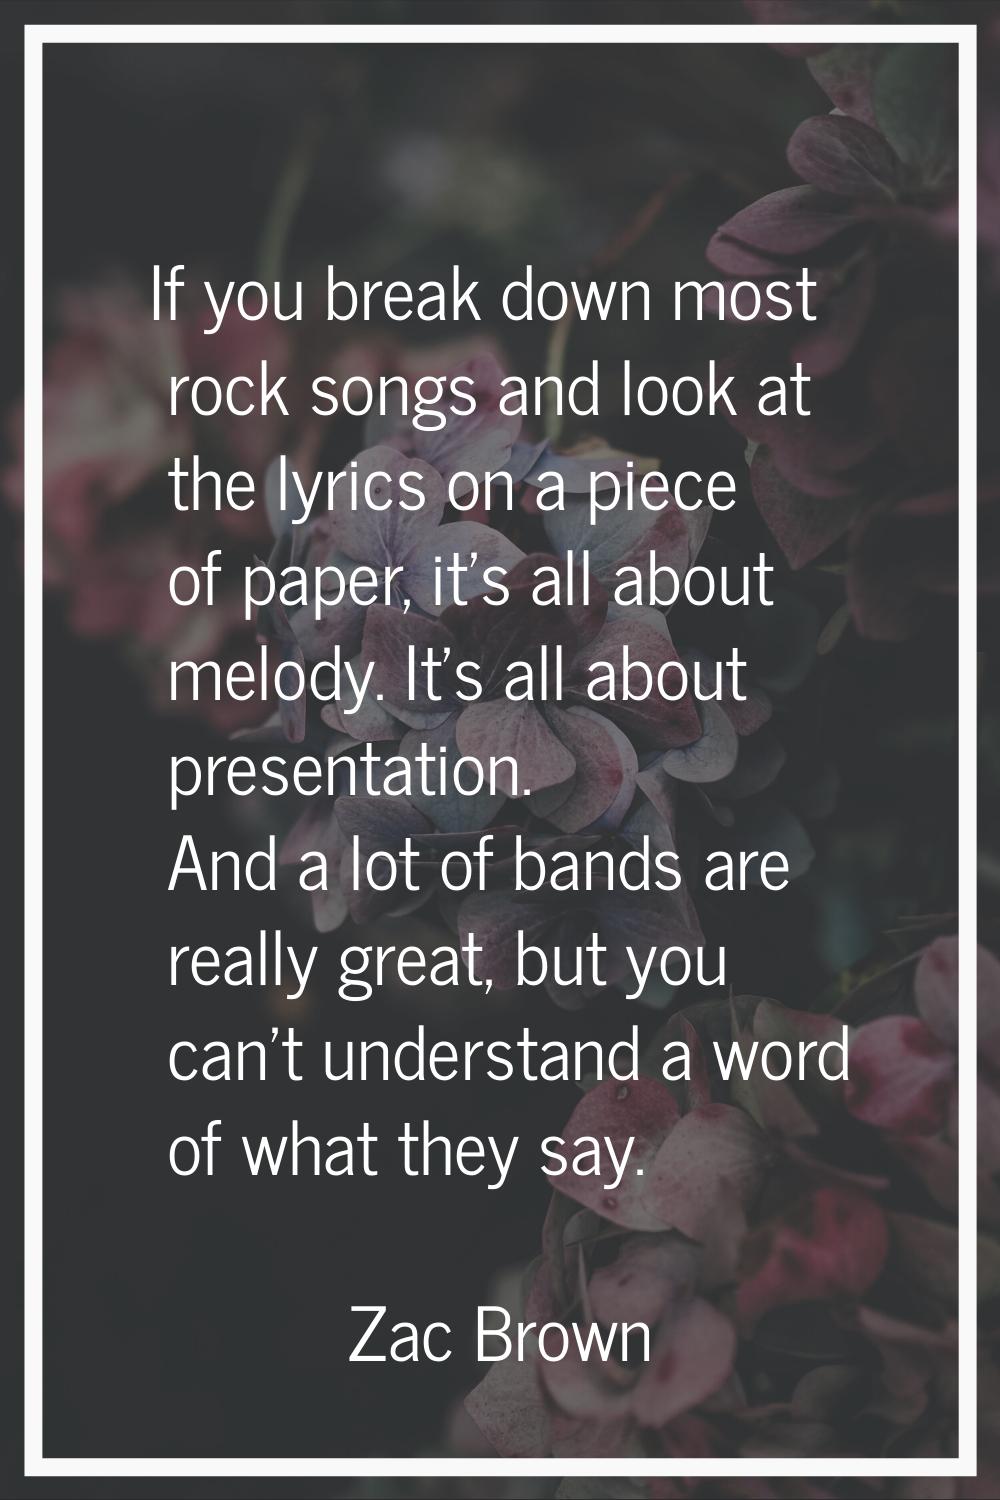 If you break down most rock songs and look at the lyrics on a piece of paper, it's all about melody